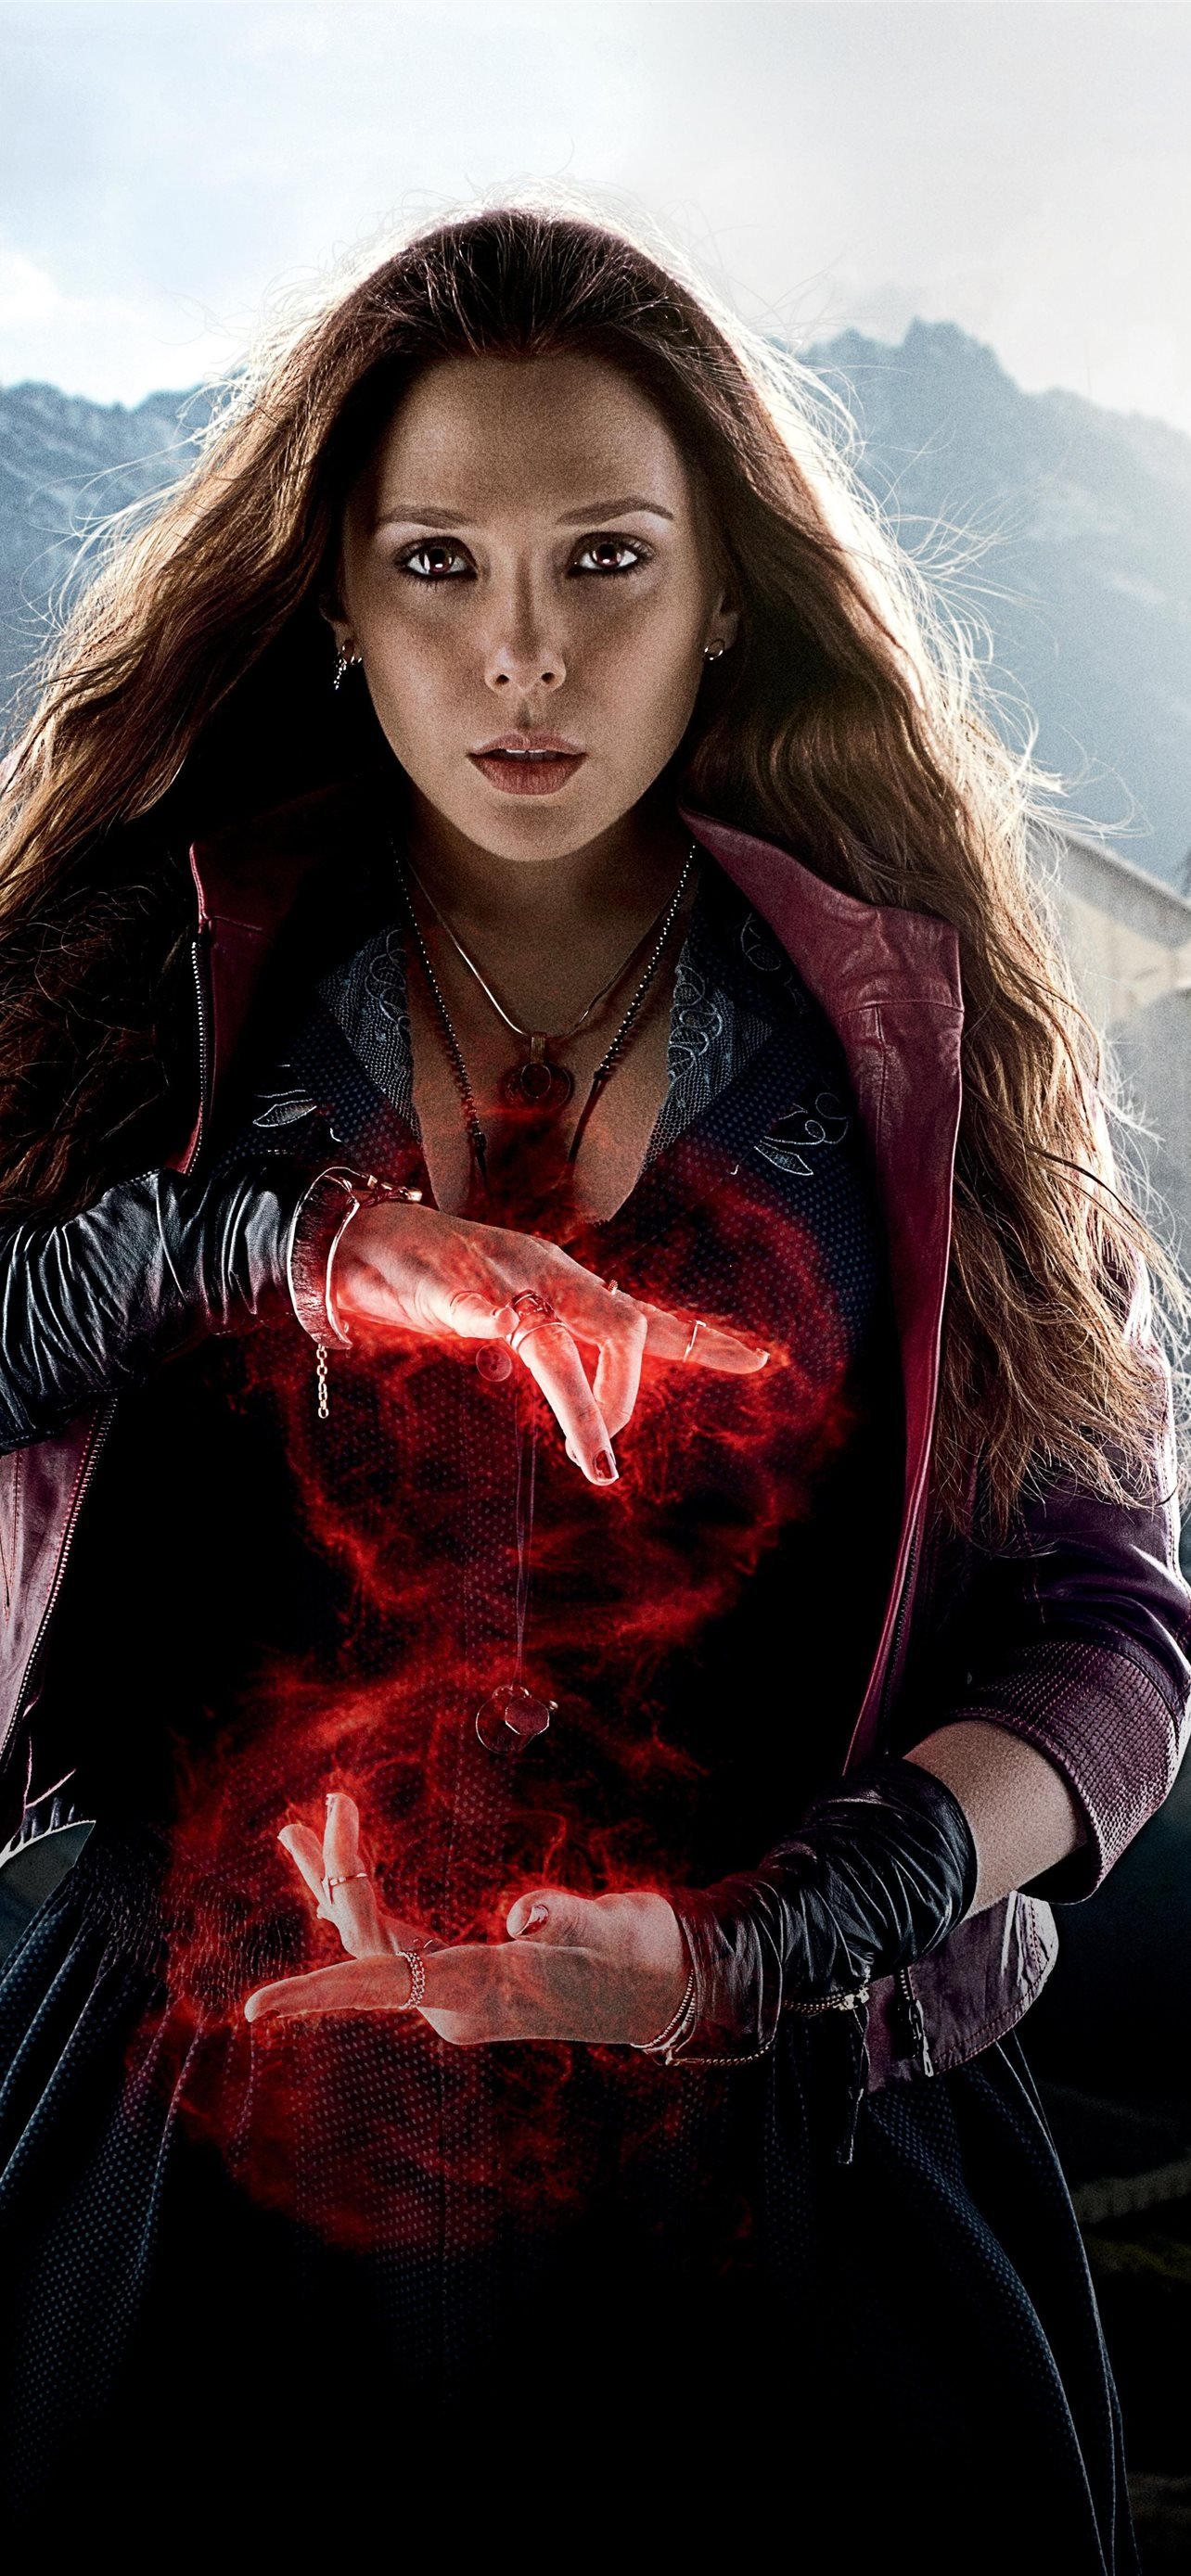 avengers age of ultron the avengers scarlet witch. iPhone Wallpaper Free Download